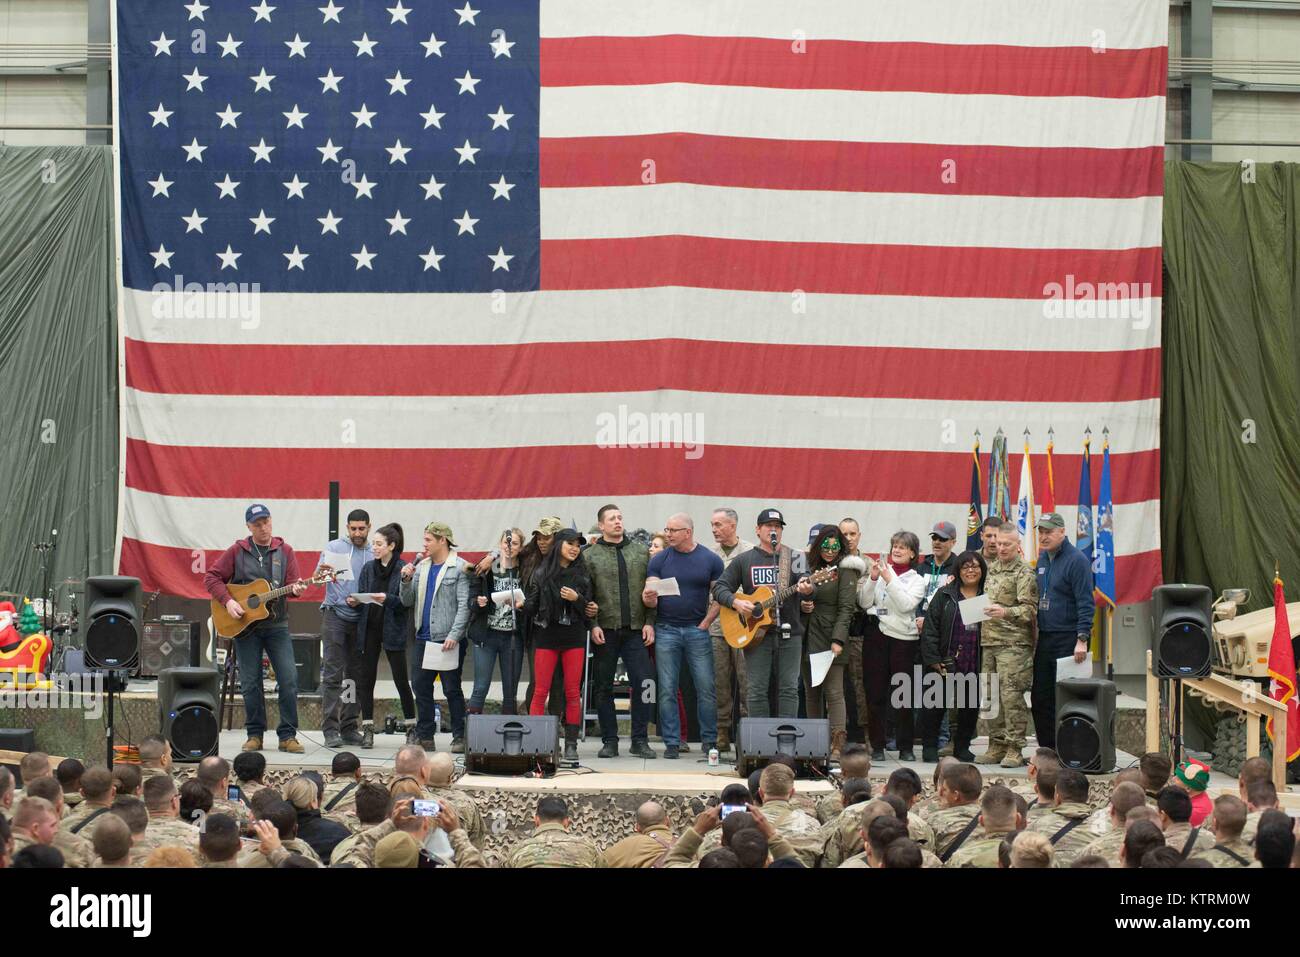 U.S. Army Medal of Honor Recipient Florent Groberg, actor Adam Devine, comedian Iliza Shlesinger, World Wrestling Entertainment (WWE) wrestlers Alicia Fox, Gail Kim and The Miz (Michael Mizanin), professional chef Robert Irvine, U.S. Joint Chiefs of Staff Chairman Joseph Dunford and country music singer Jerrod Niemann perform on stage for U.S. soldiers during the USO Holiday Tour at the Bagram Airfield December 24, 2017 in Bagram, Afghanistan. Stock Photo